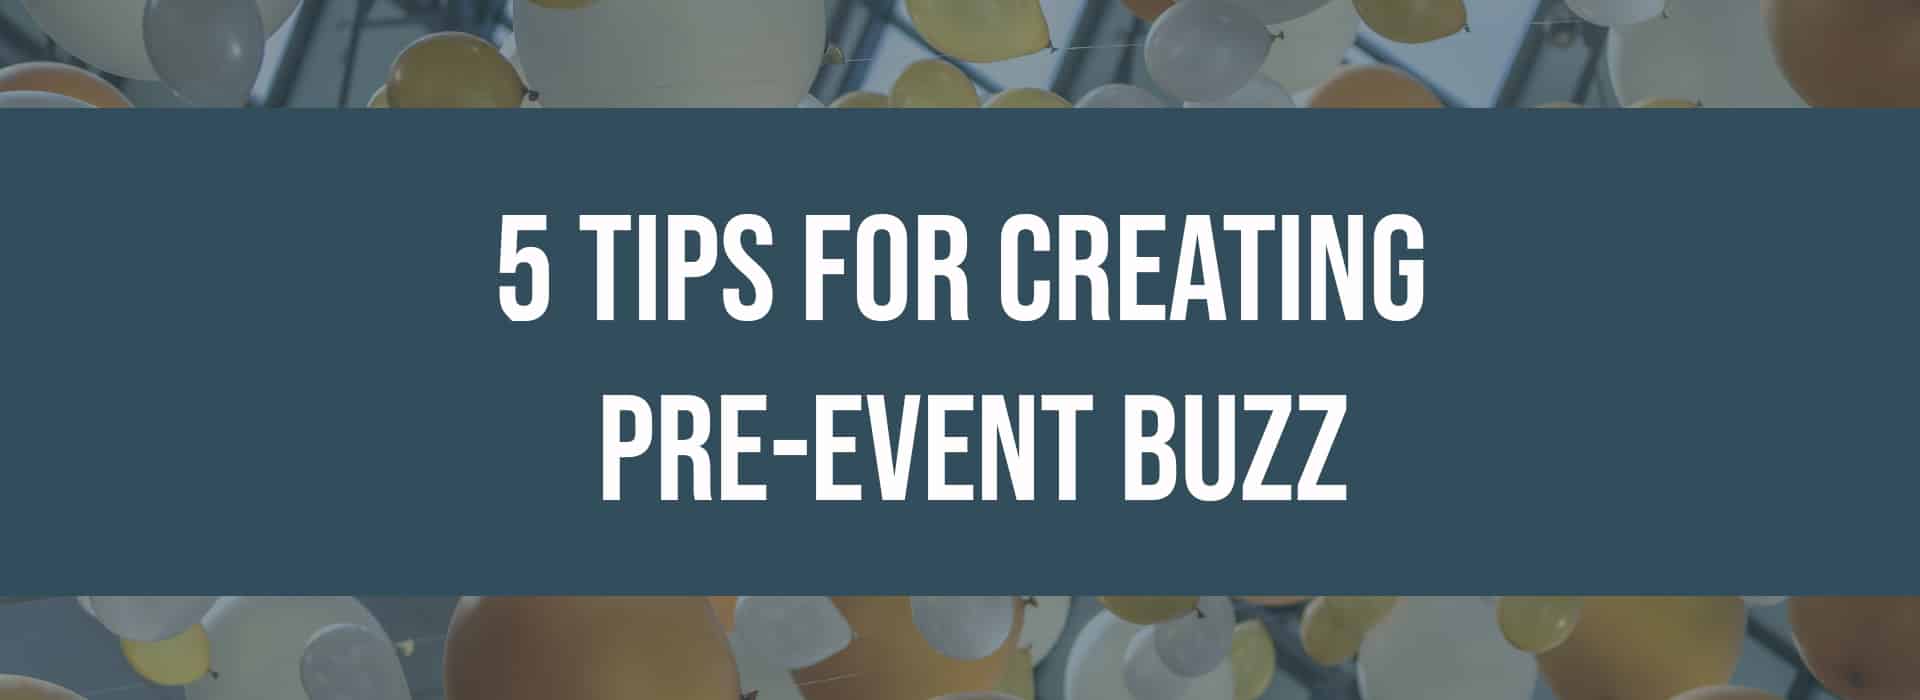 5 Tips for Creating Pre-Event Buzz